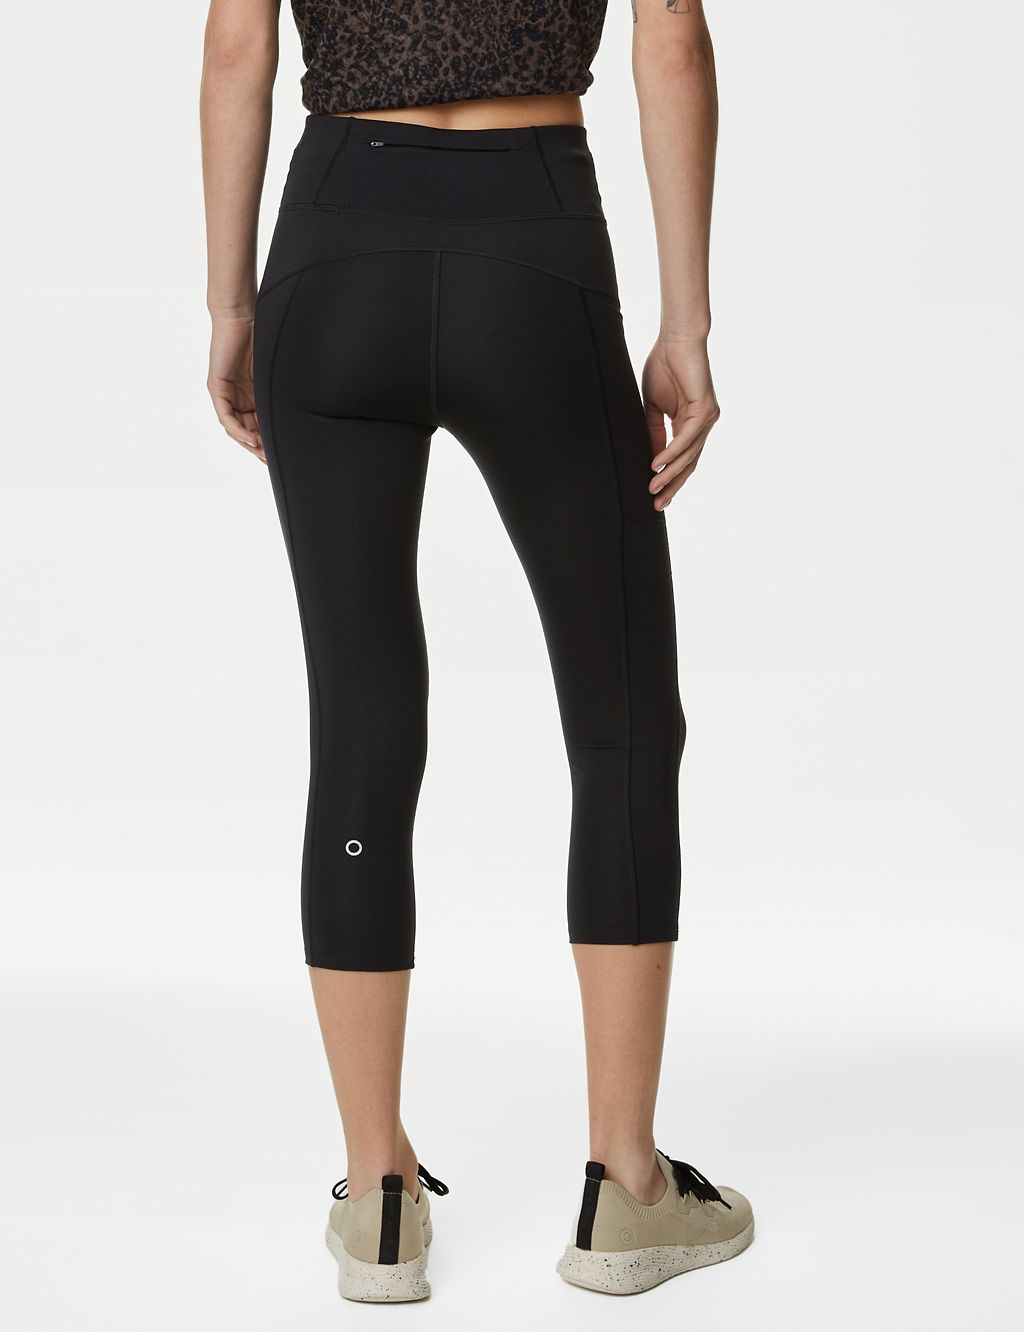 Go Move Cropped Gym Leggings 8 of 8